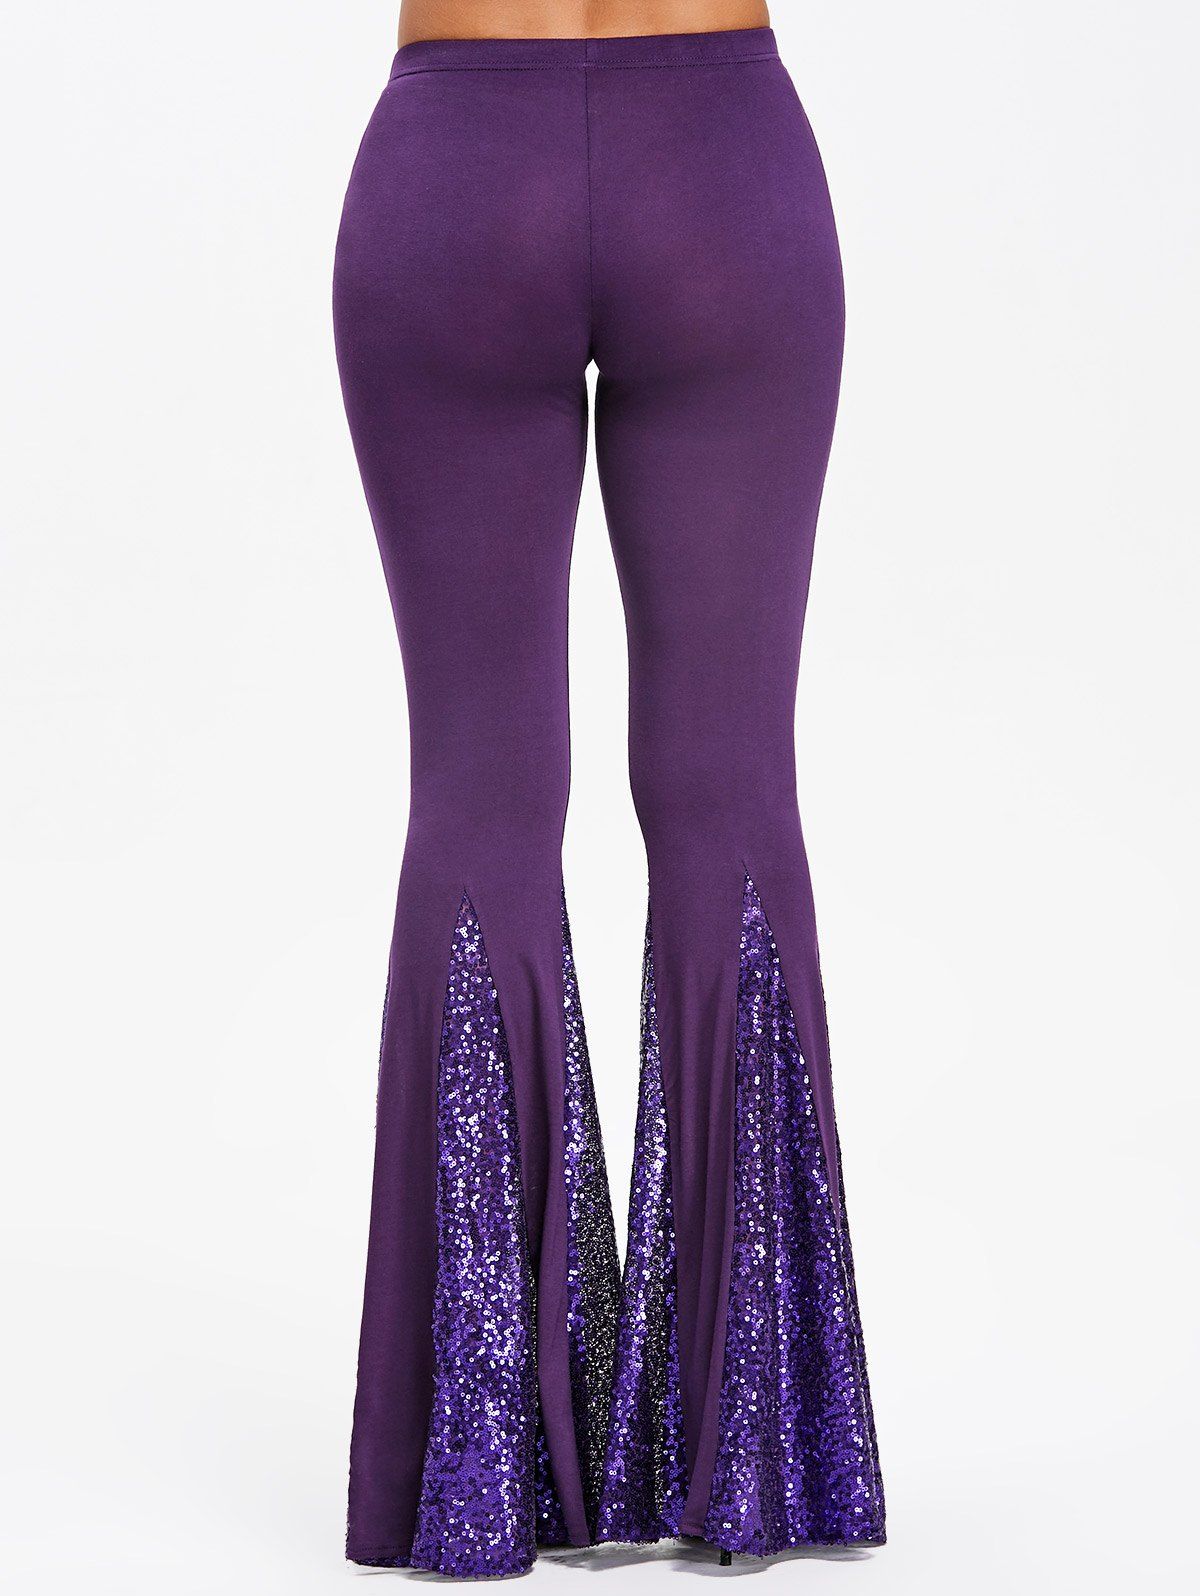 2018 Sequined Flare Pants PURPLE XL In Pants Online Store. Best Galaxy ...